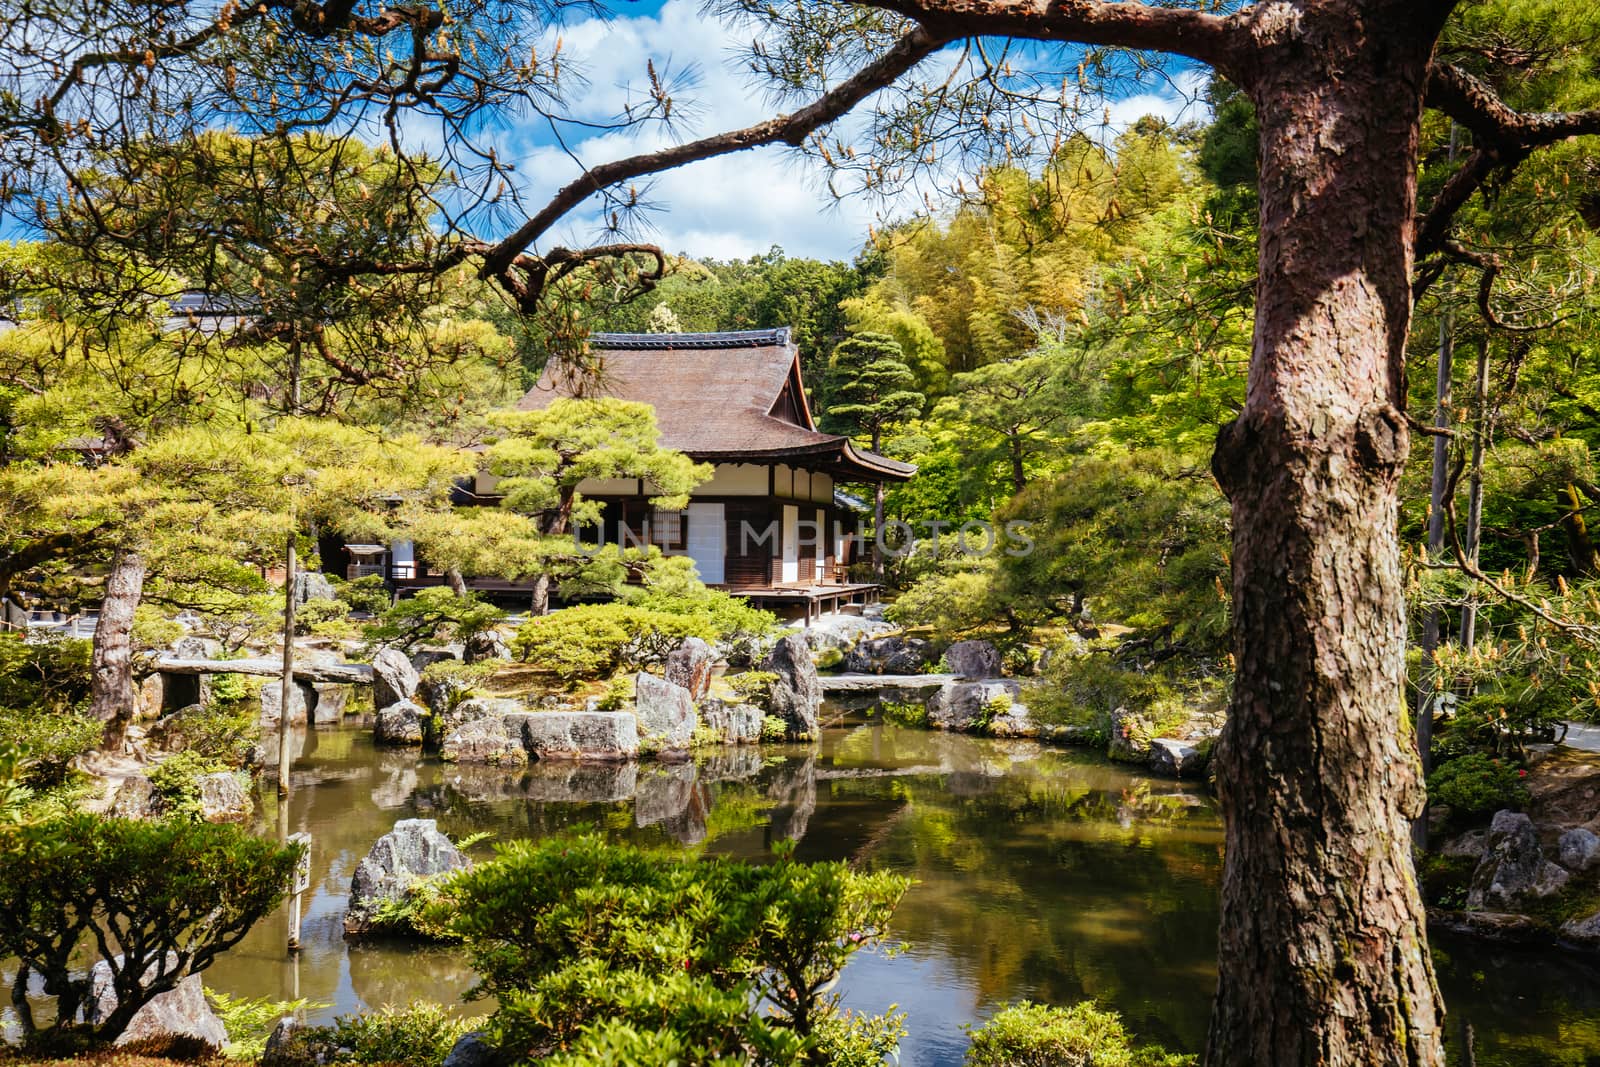 The stunning architecture and gardens at Silver Pavillion Ginkakuji temple in Kyoto, Japan